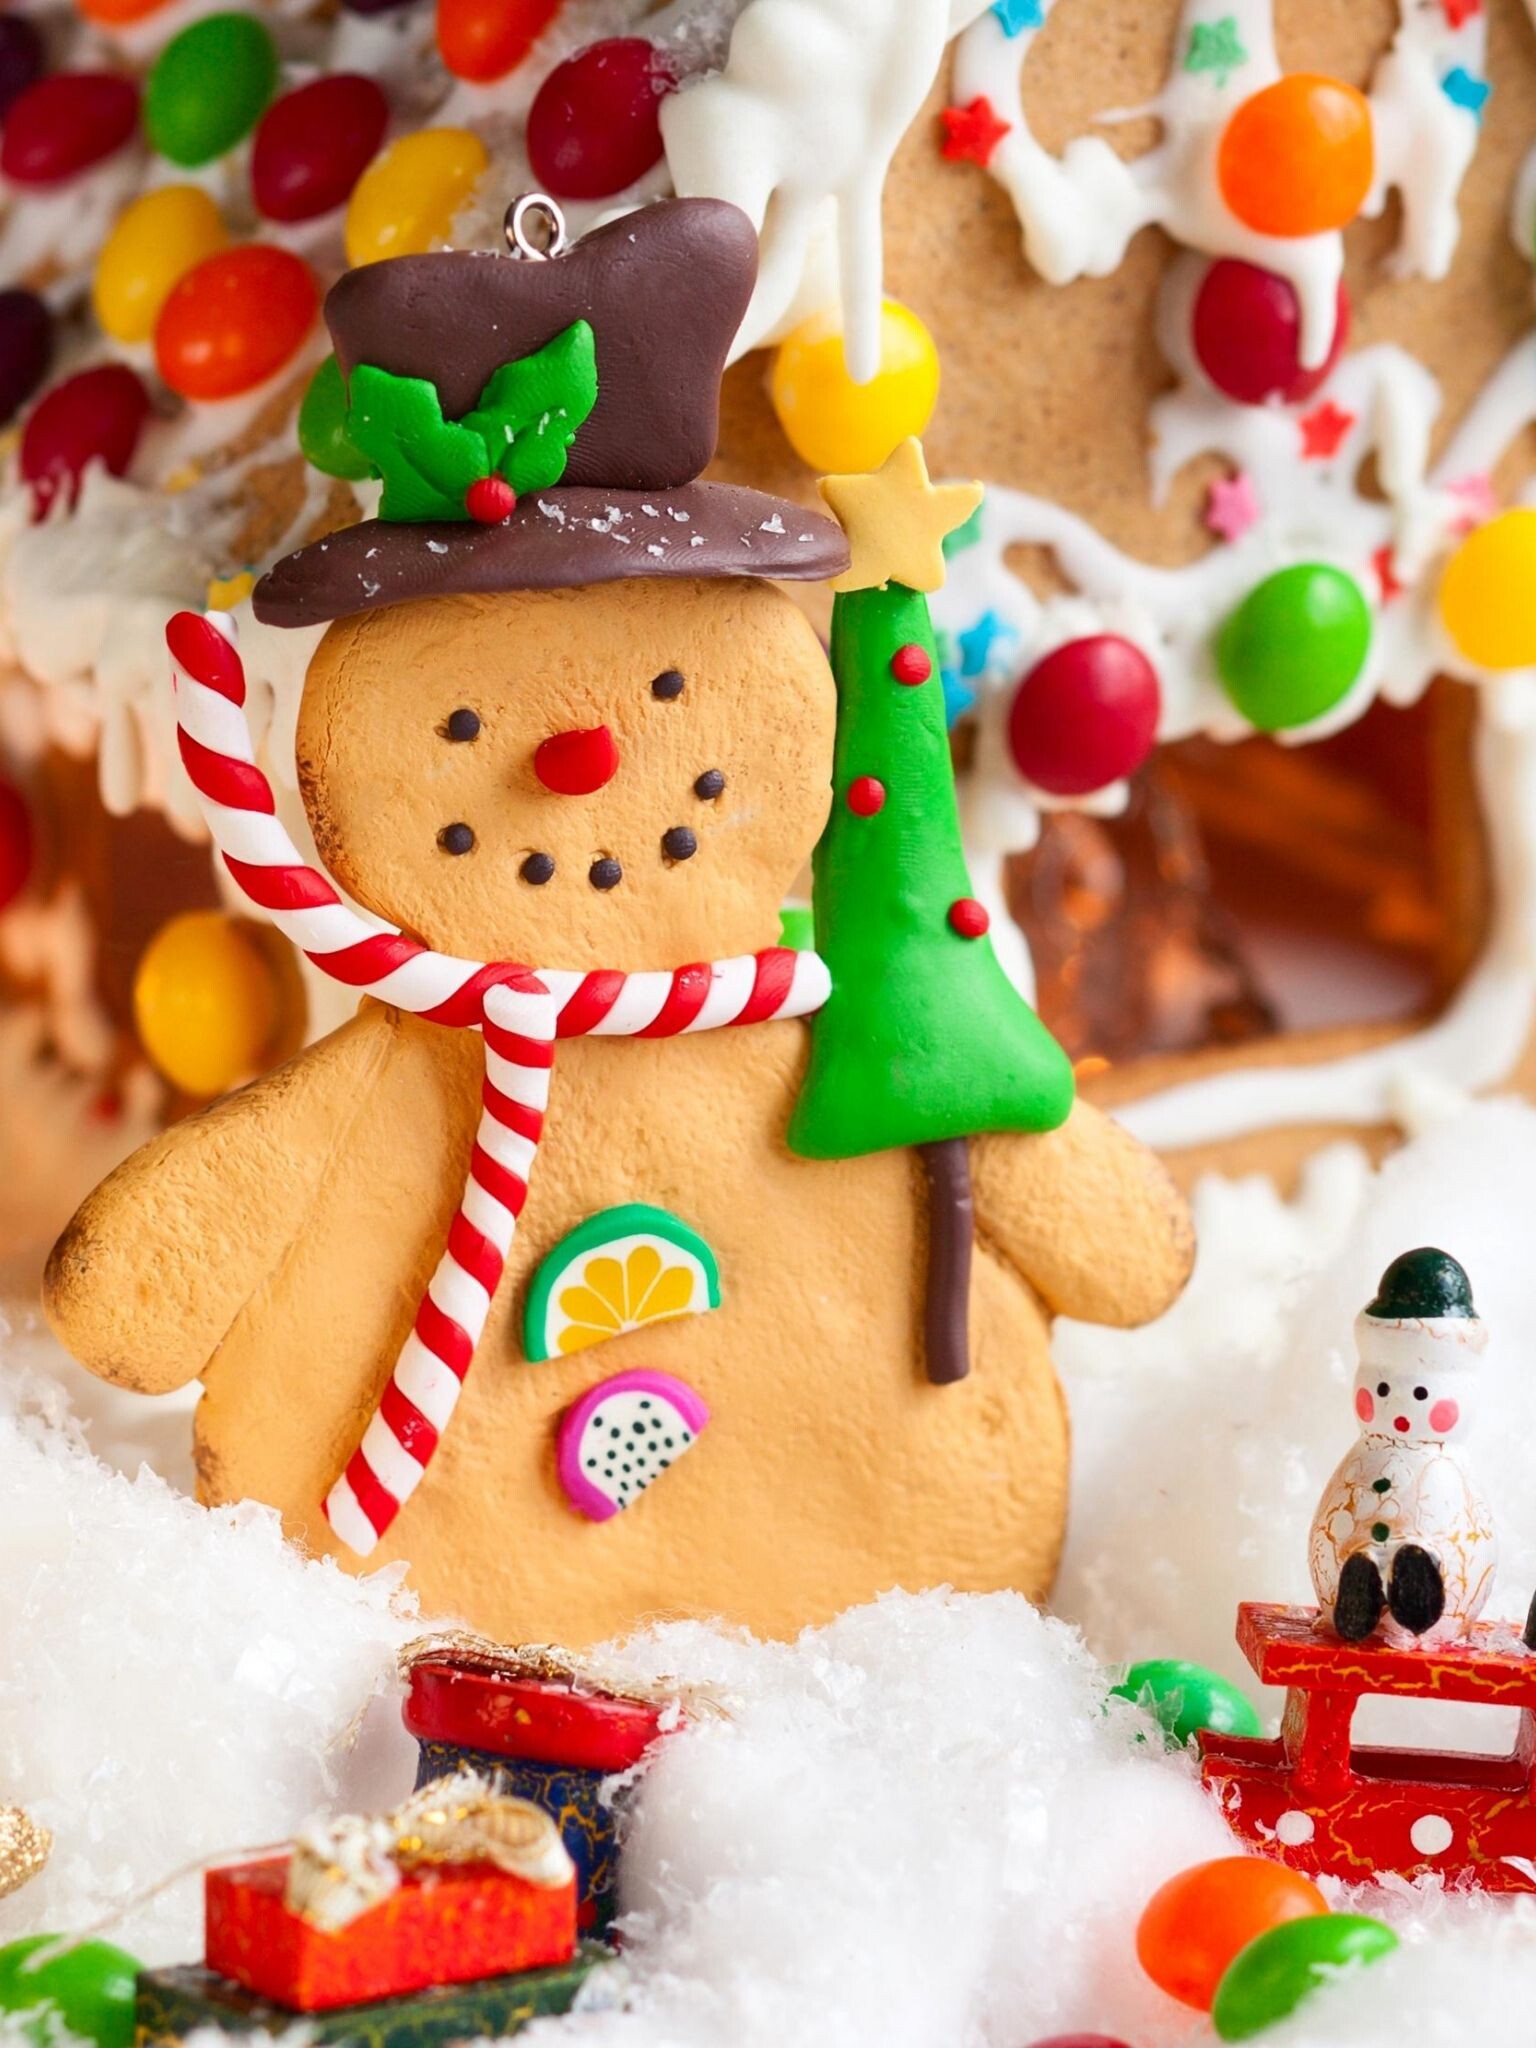 Gingerbread House: Christmas baking activities, Gingerbread men, Sweet treats, Bright decorations. 1540x2050 HD Background.